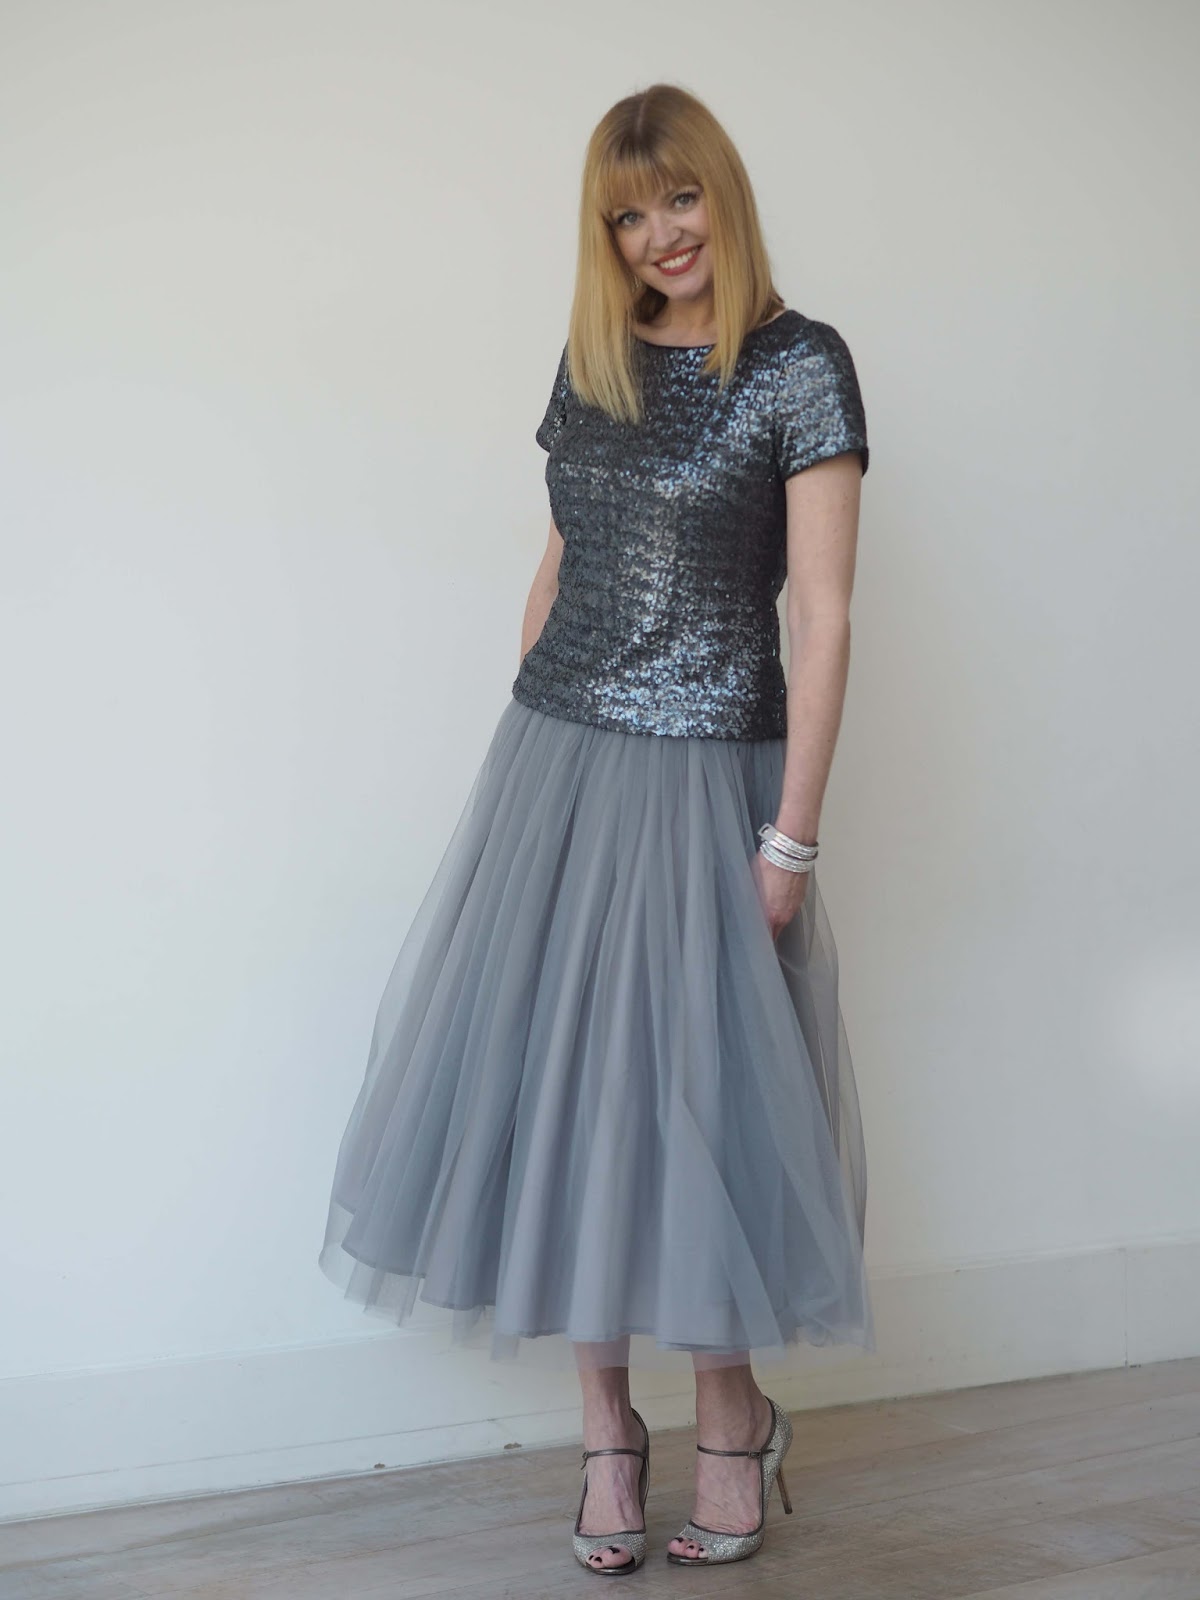 A Dreamy Tulle Skirt With All Of The Sparkle - What Lizzy Loves